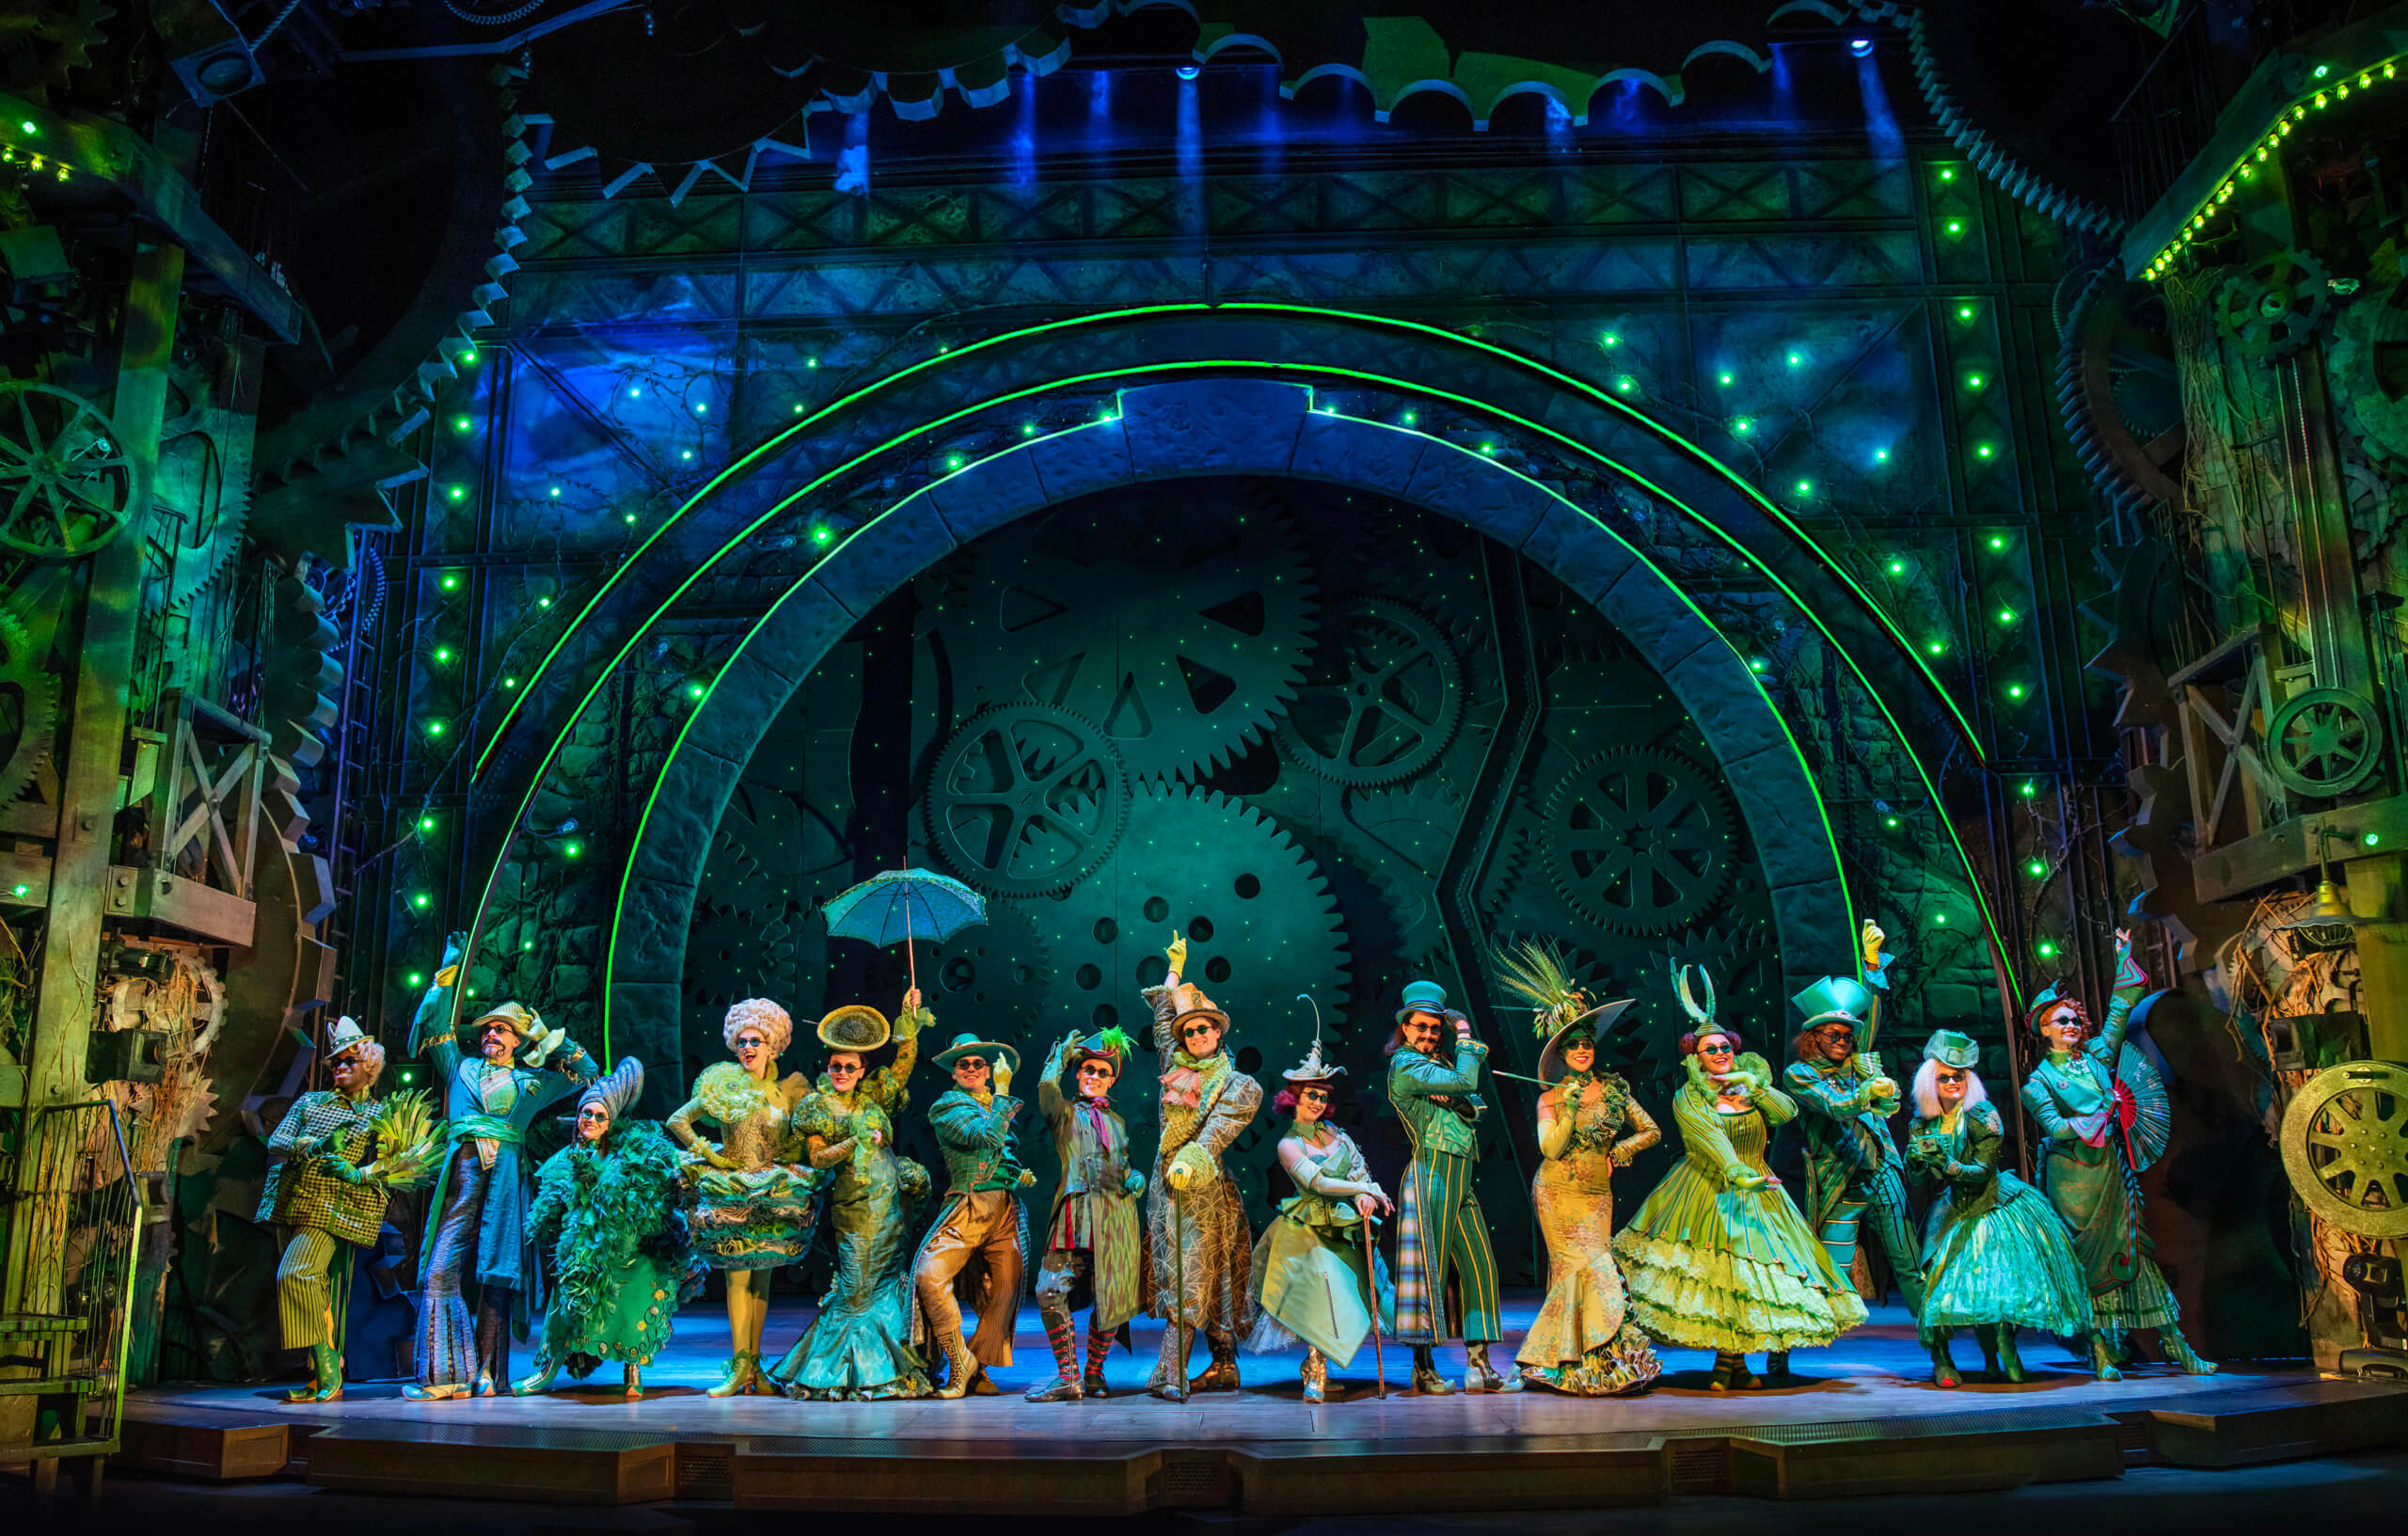 Cast of Wicked the Musical, West End, London, England